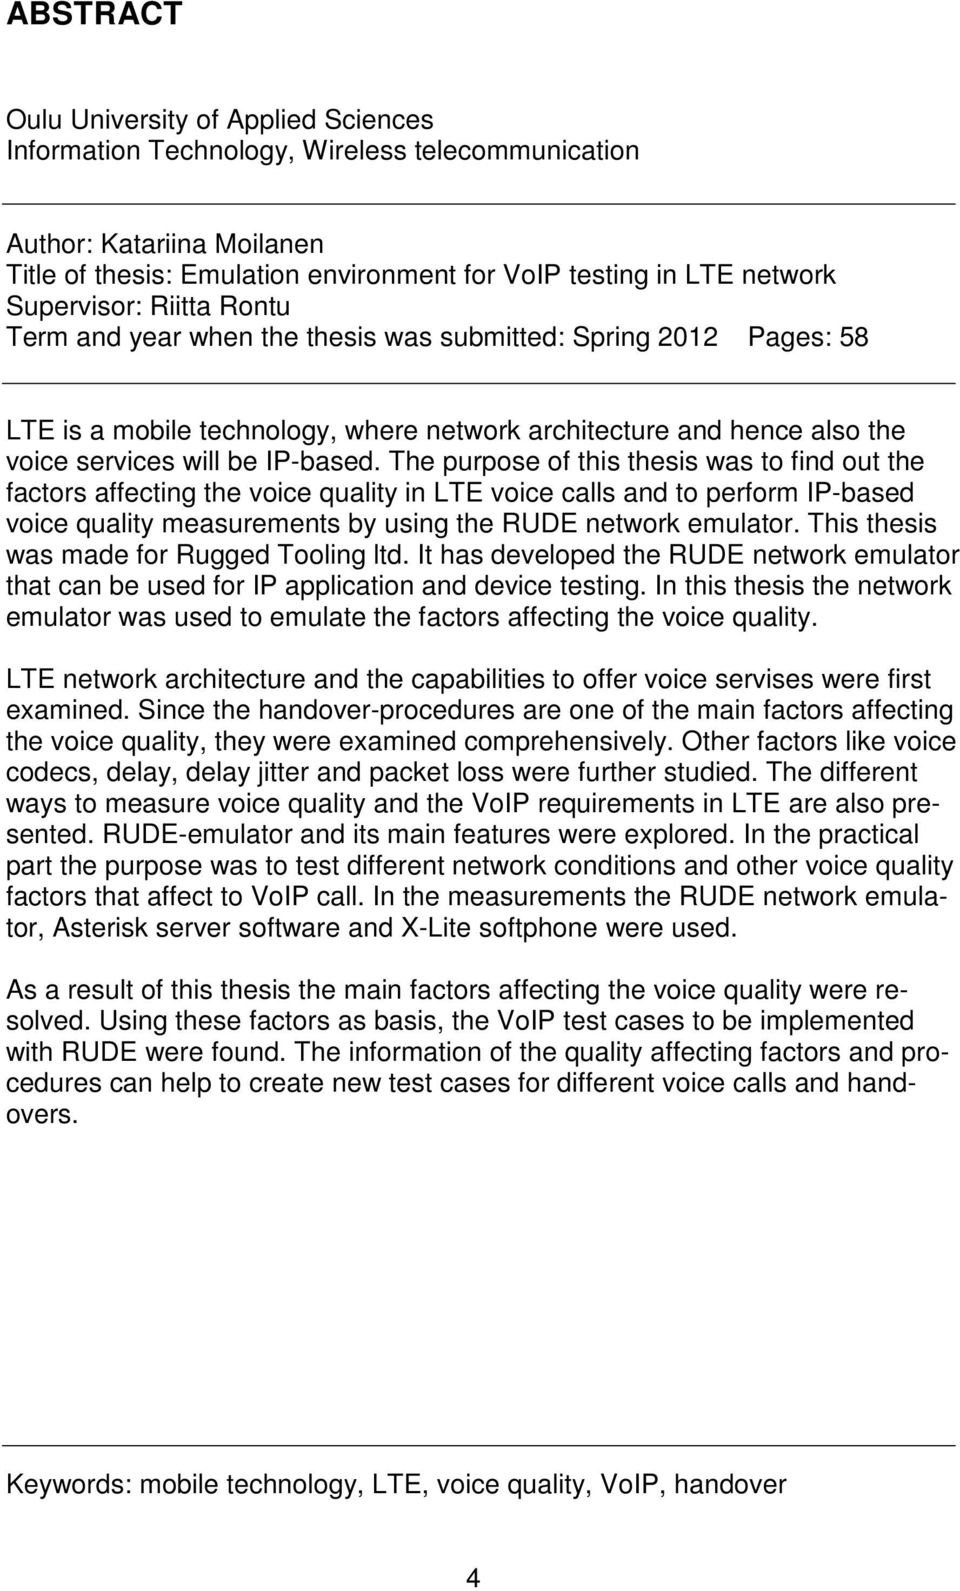 The purpose of this thesis was to find out the factors affecting the voice quality in LTE voice calls and to perform IP-based voice quality measurements by using the RUDE network emulator.